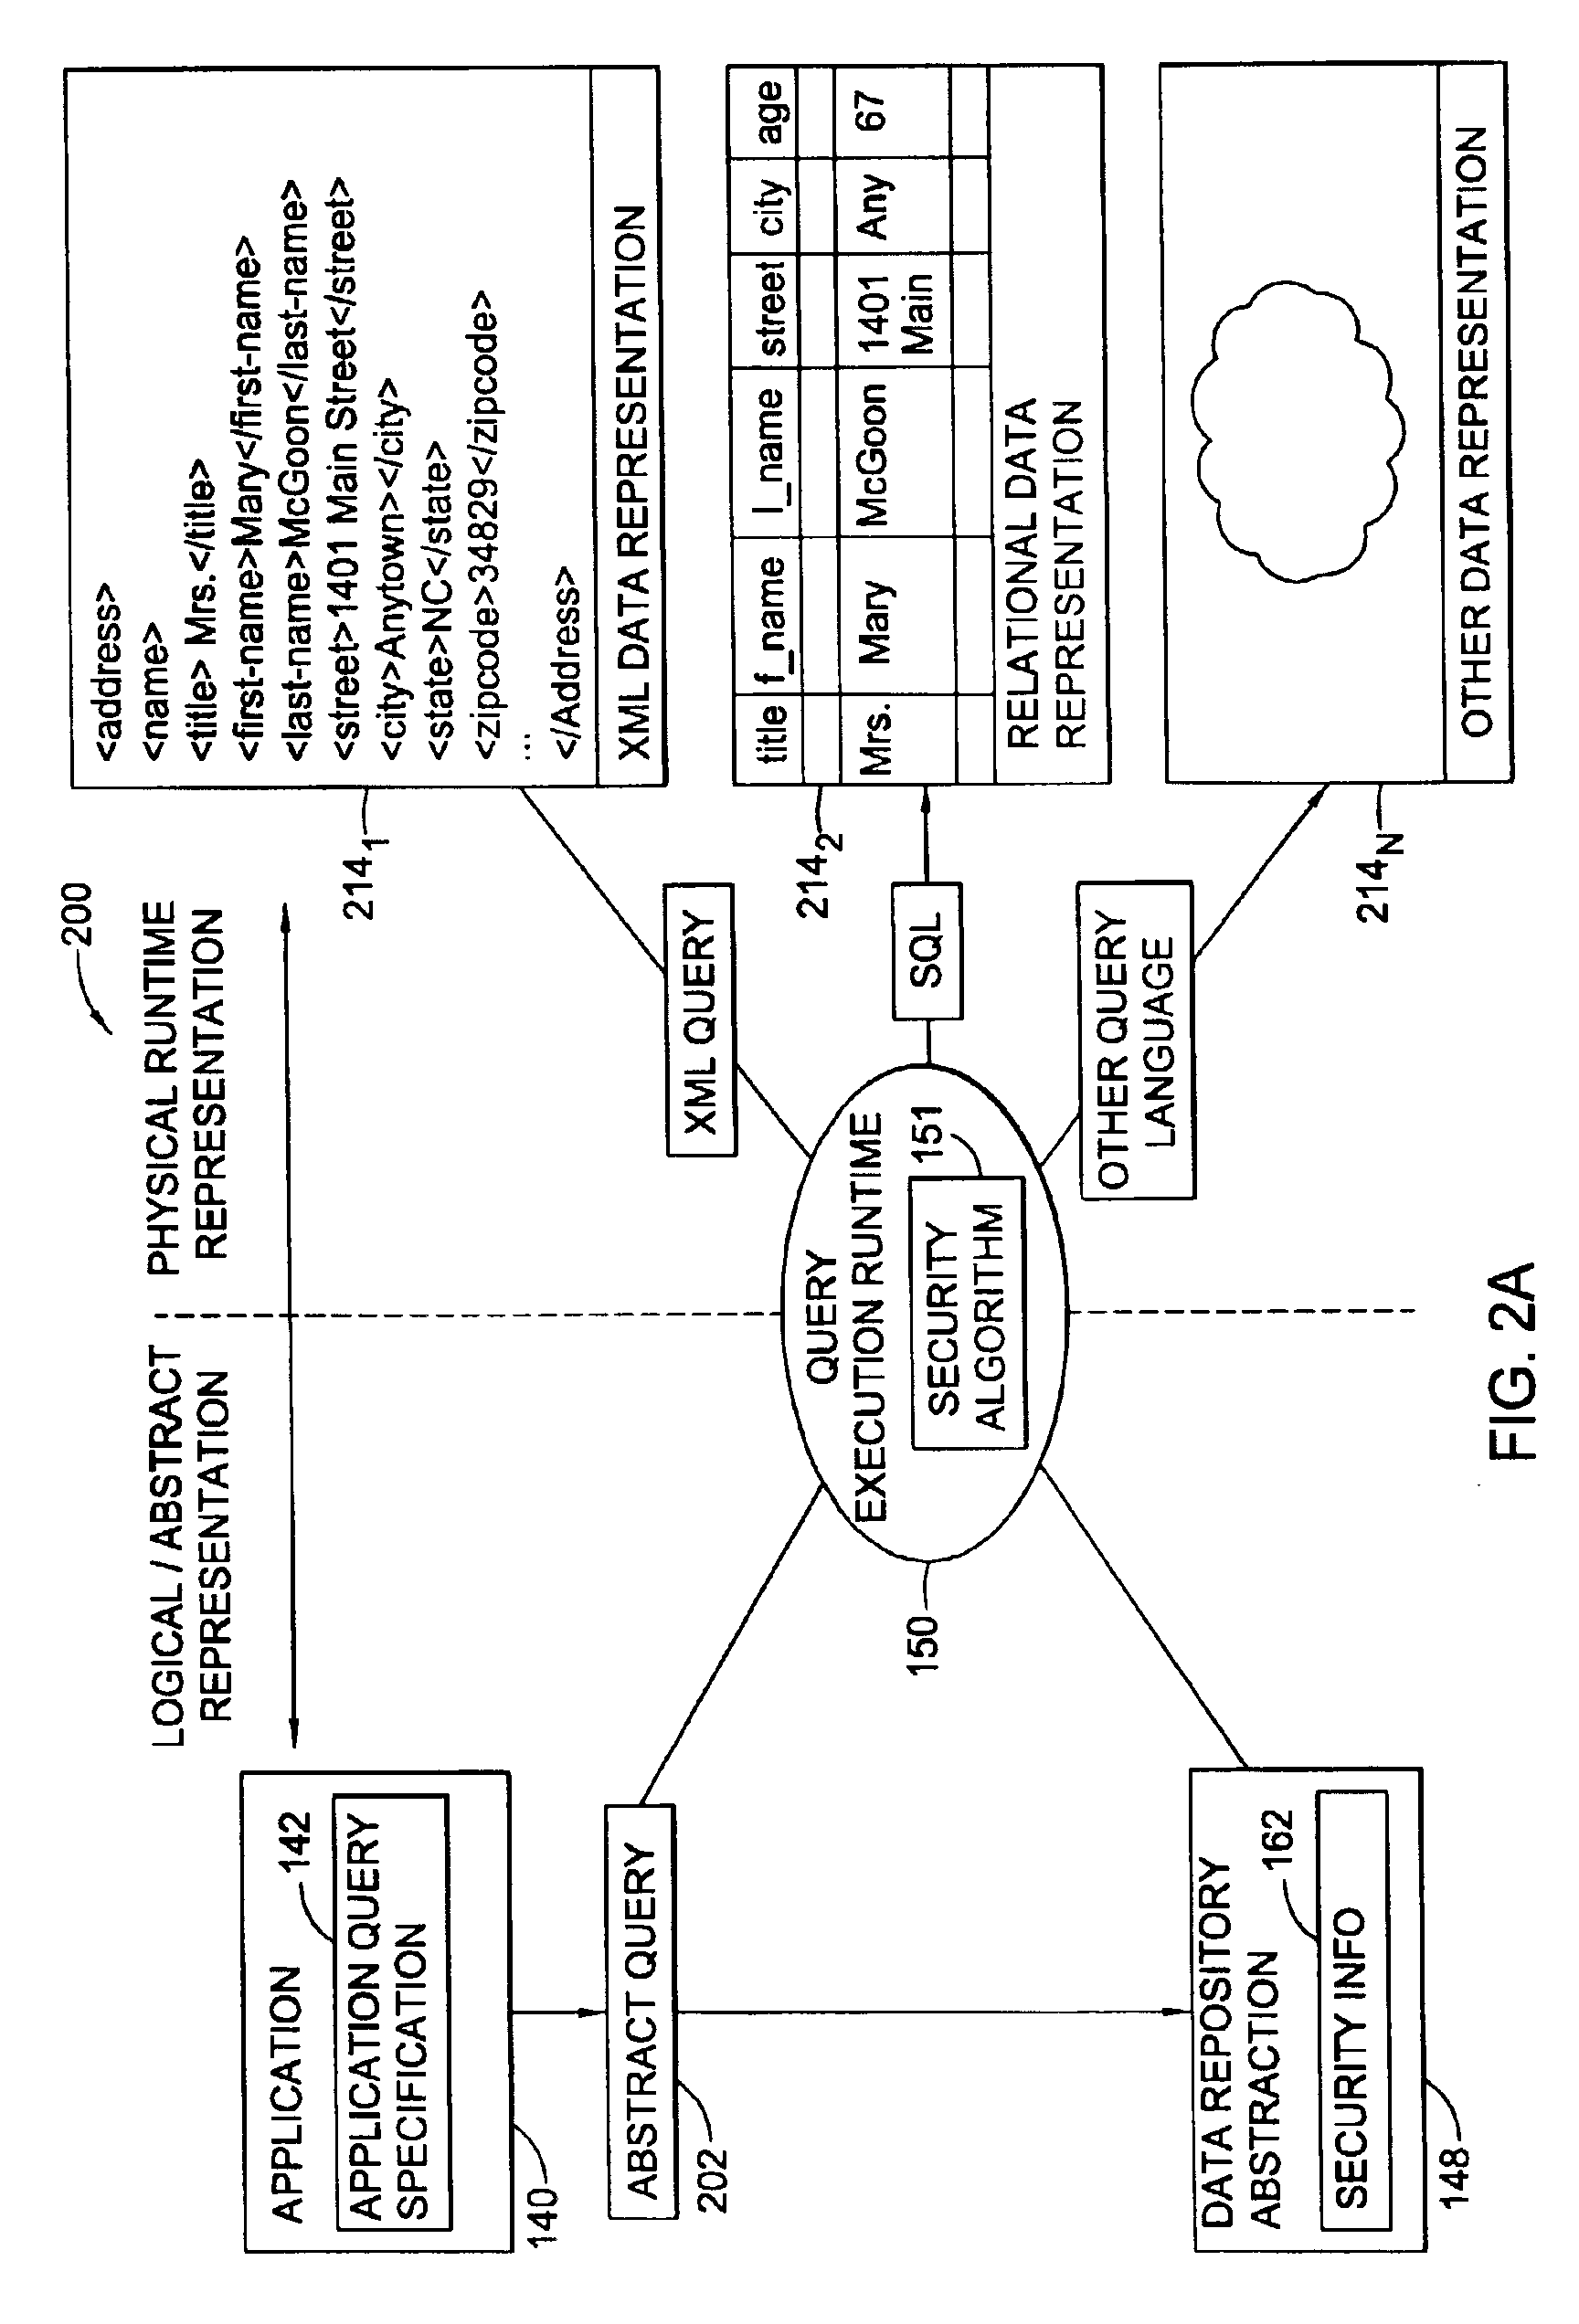 Method of query return data analysis for early warning indicators of possible security exposures